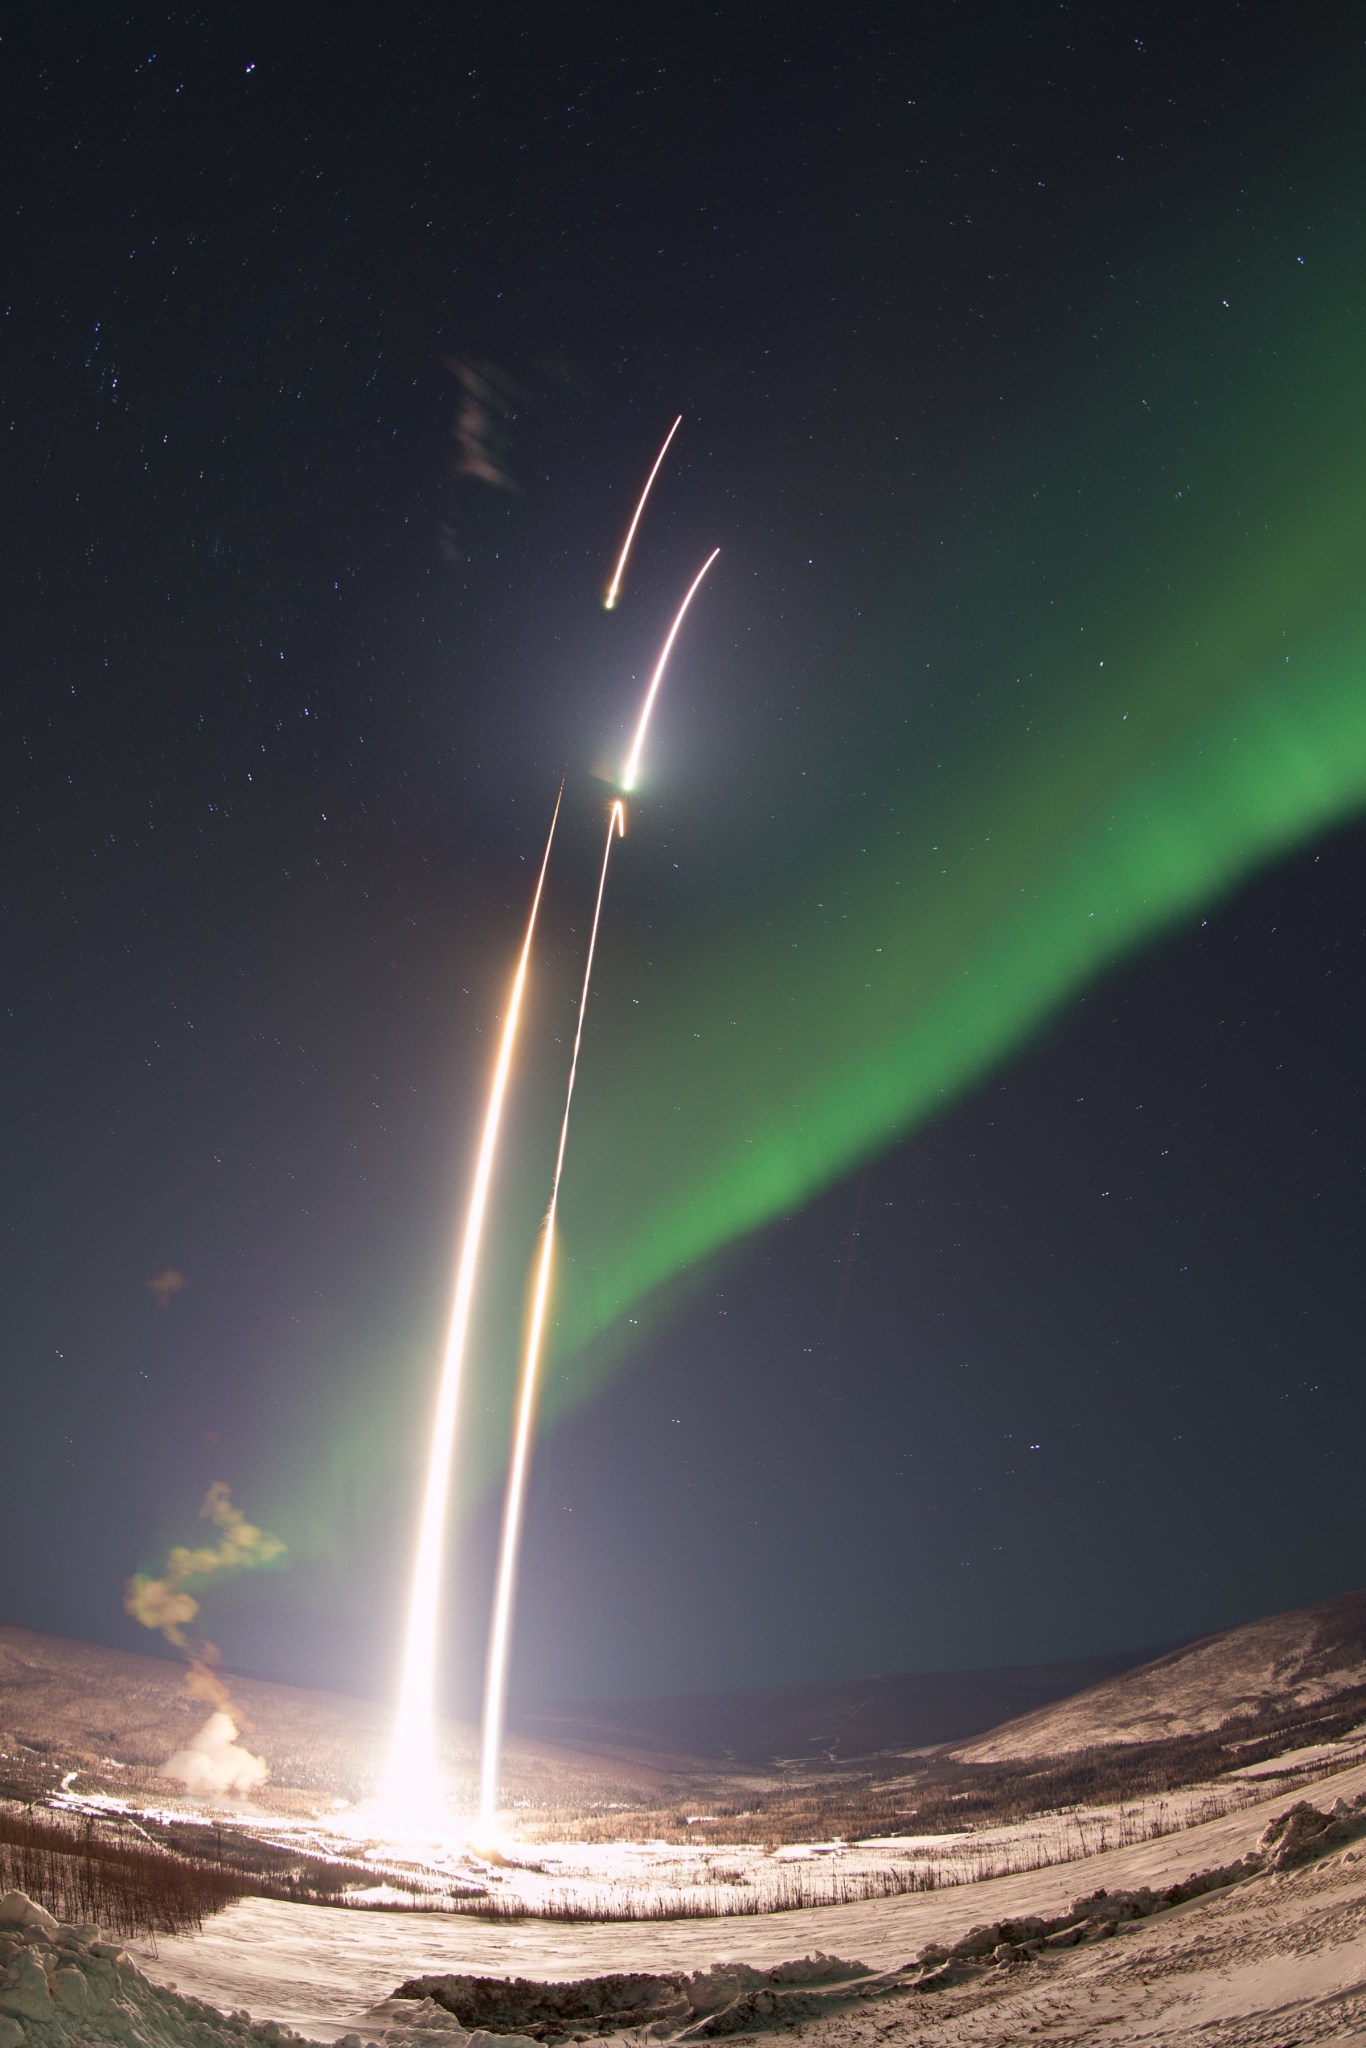 A composite, long-exposure image of two sounding rockets launching, represented by two white streaks. A bright green aurora is in the background against a snowy landscape.